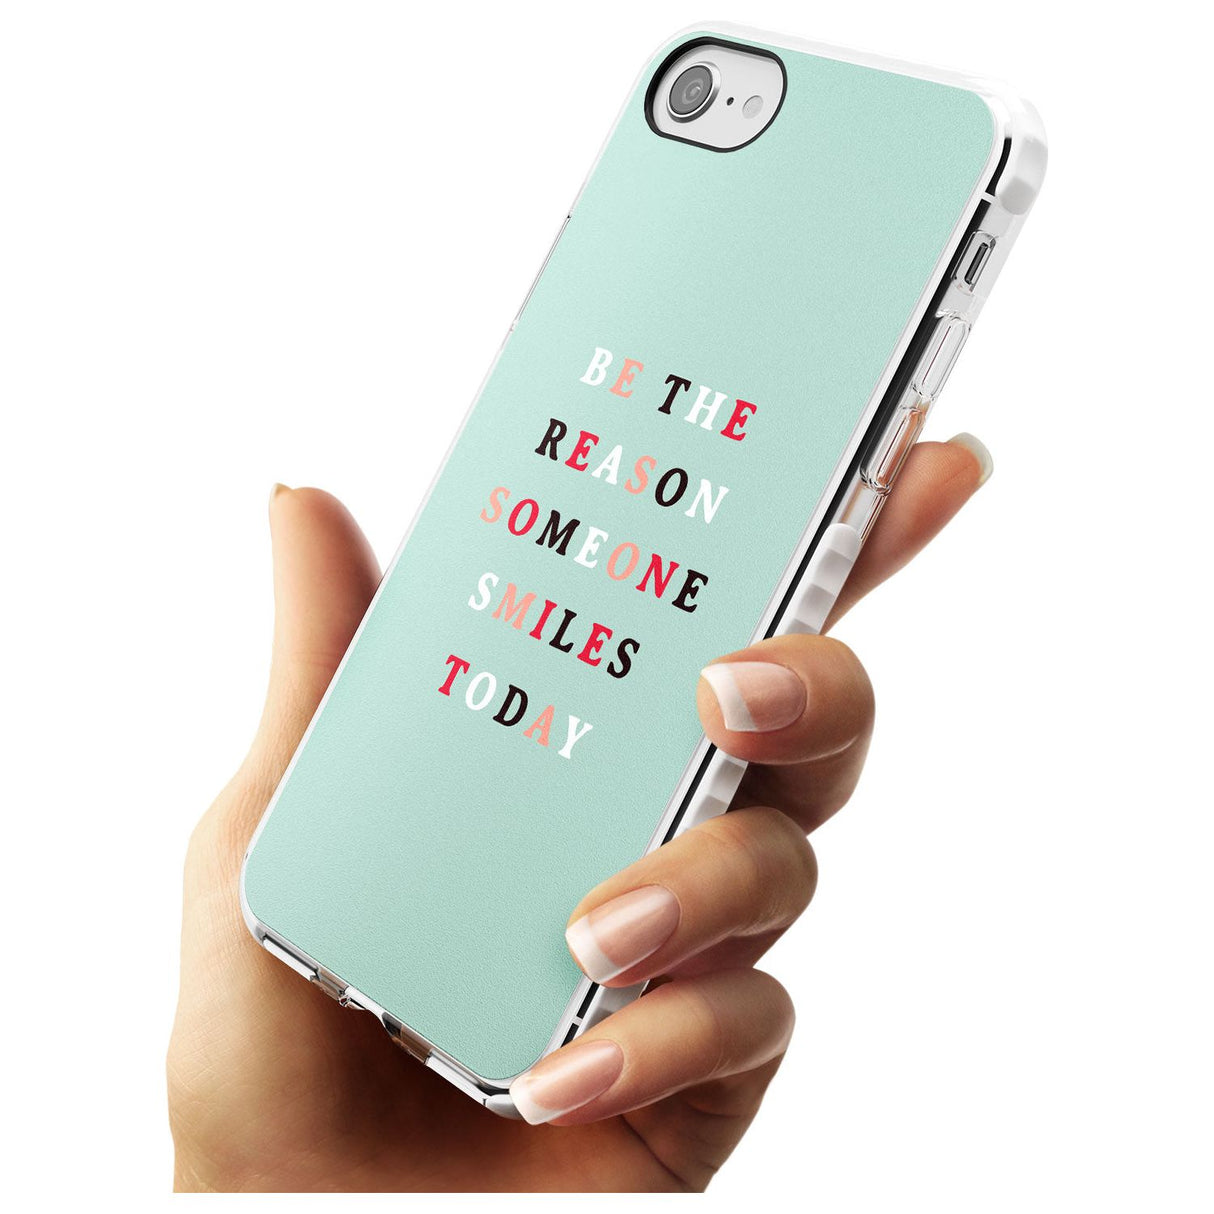 Be the reason someone smiles Impact Phone Case for iPhone SE 8 7 Plus